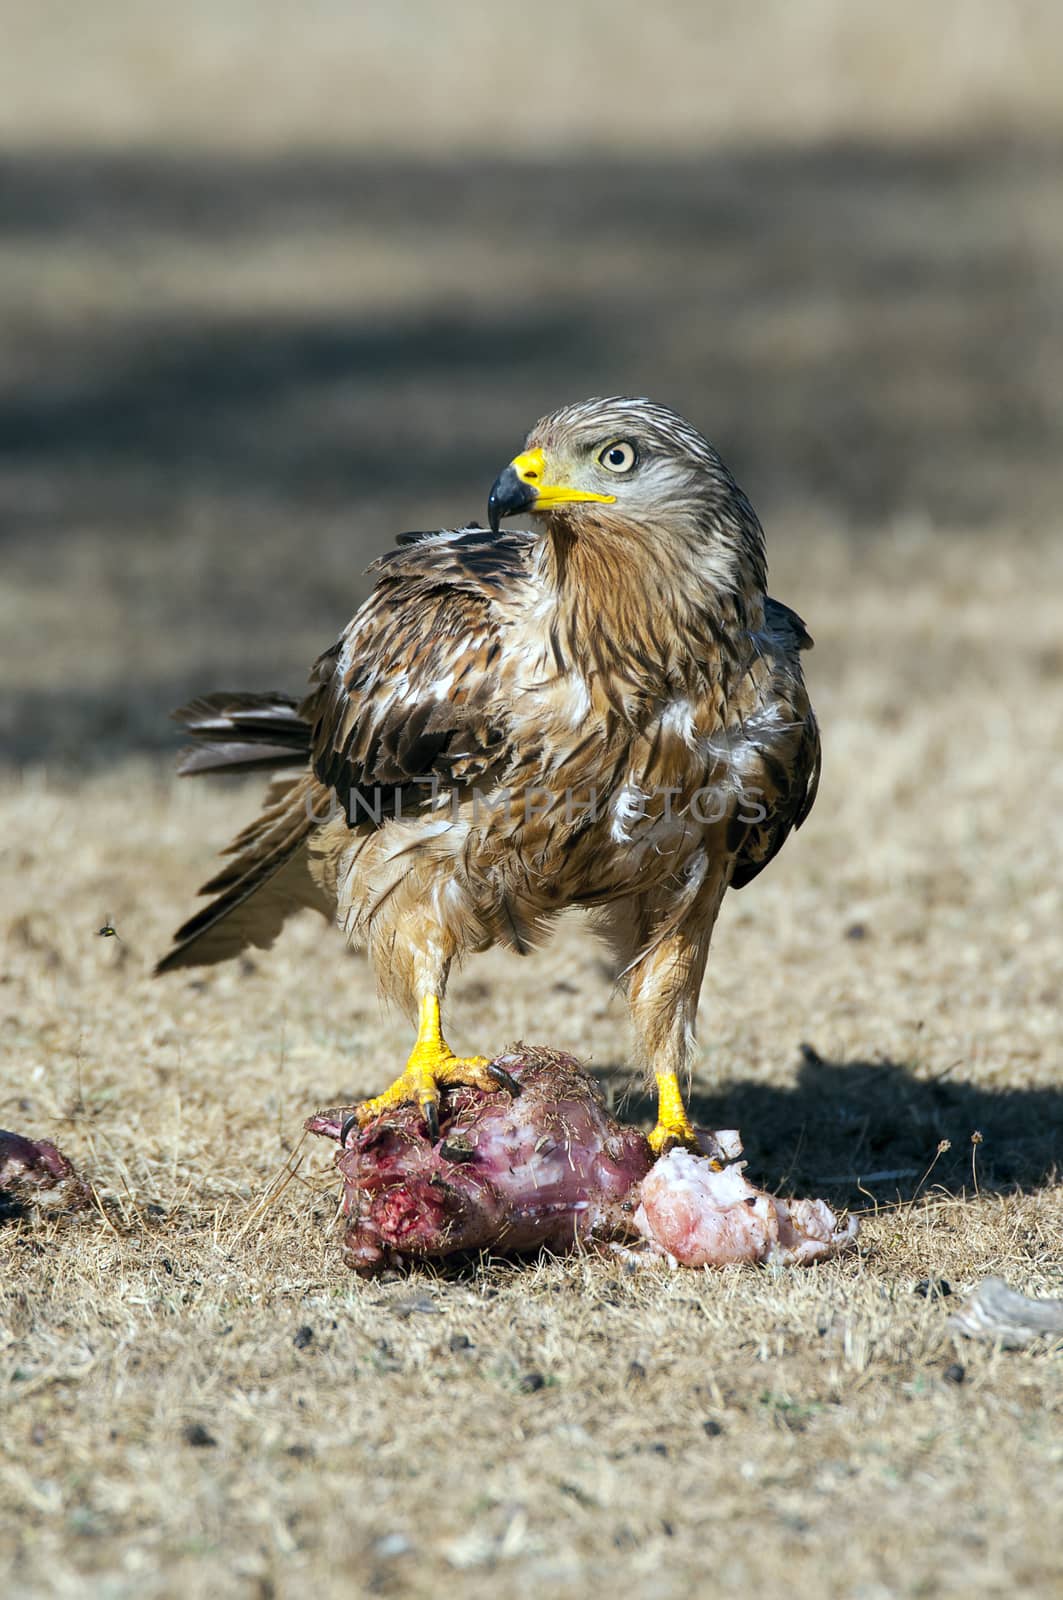 Red kite, Milvus milvus, eating carrion on the ground by jalonsohu@gmail.com